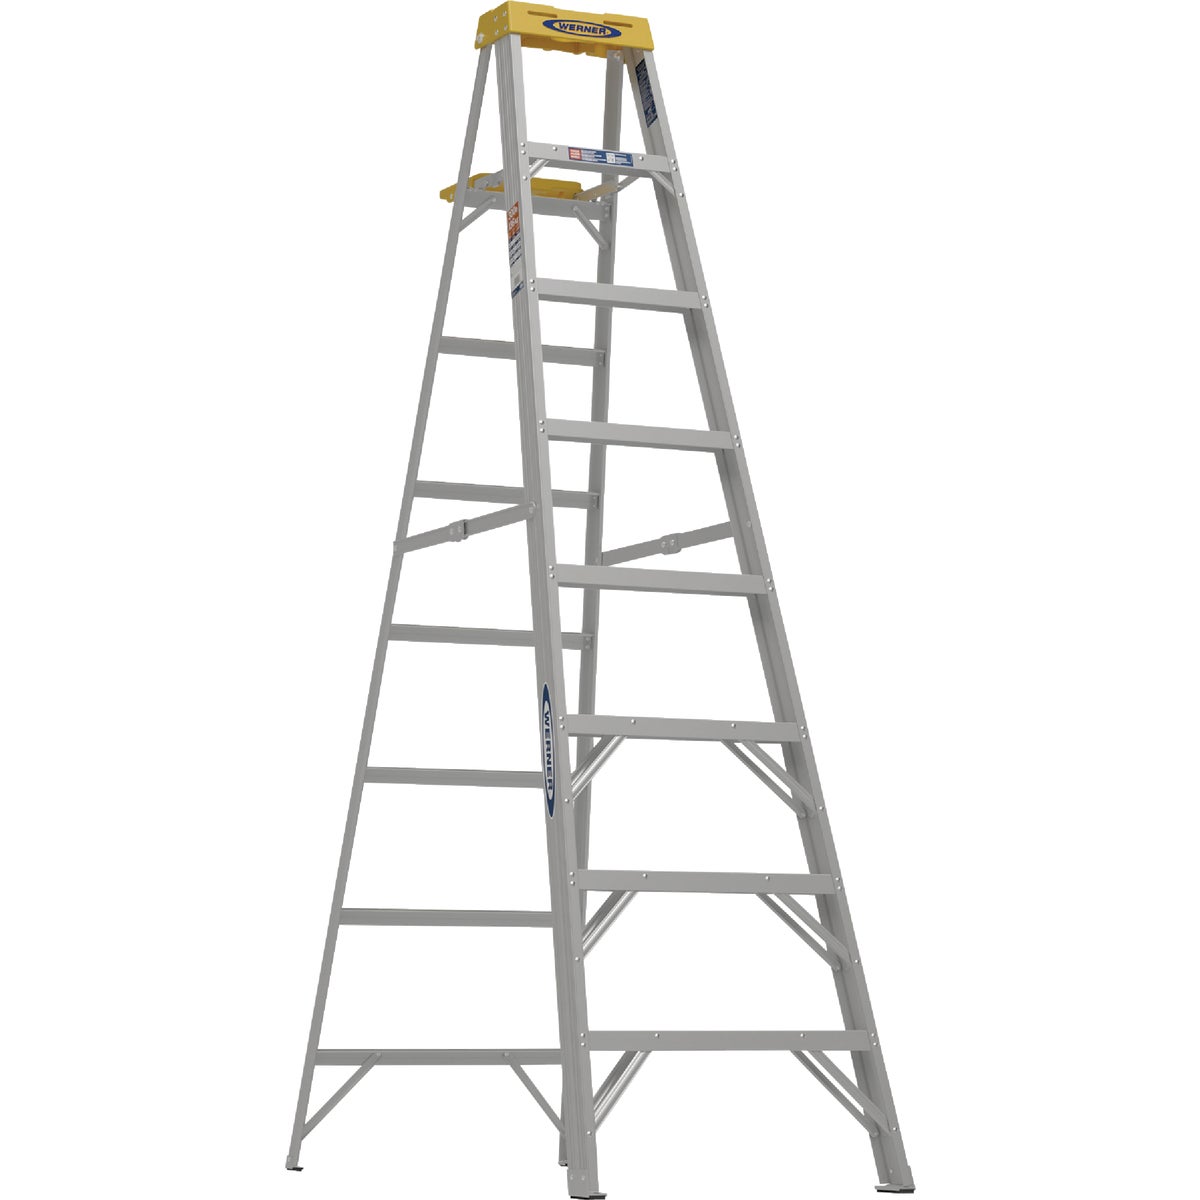 Werner 8 Ft. Aluminum Step Ladder with 300 Lb. Load Capacity Type IA Ladder Rating